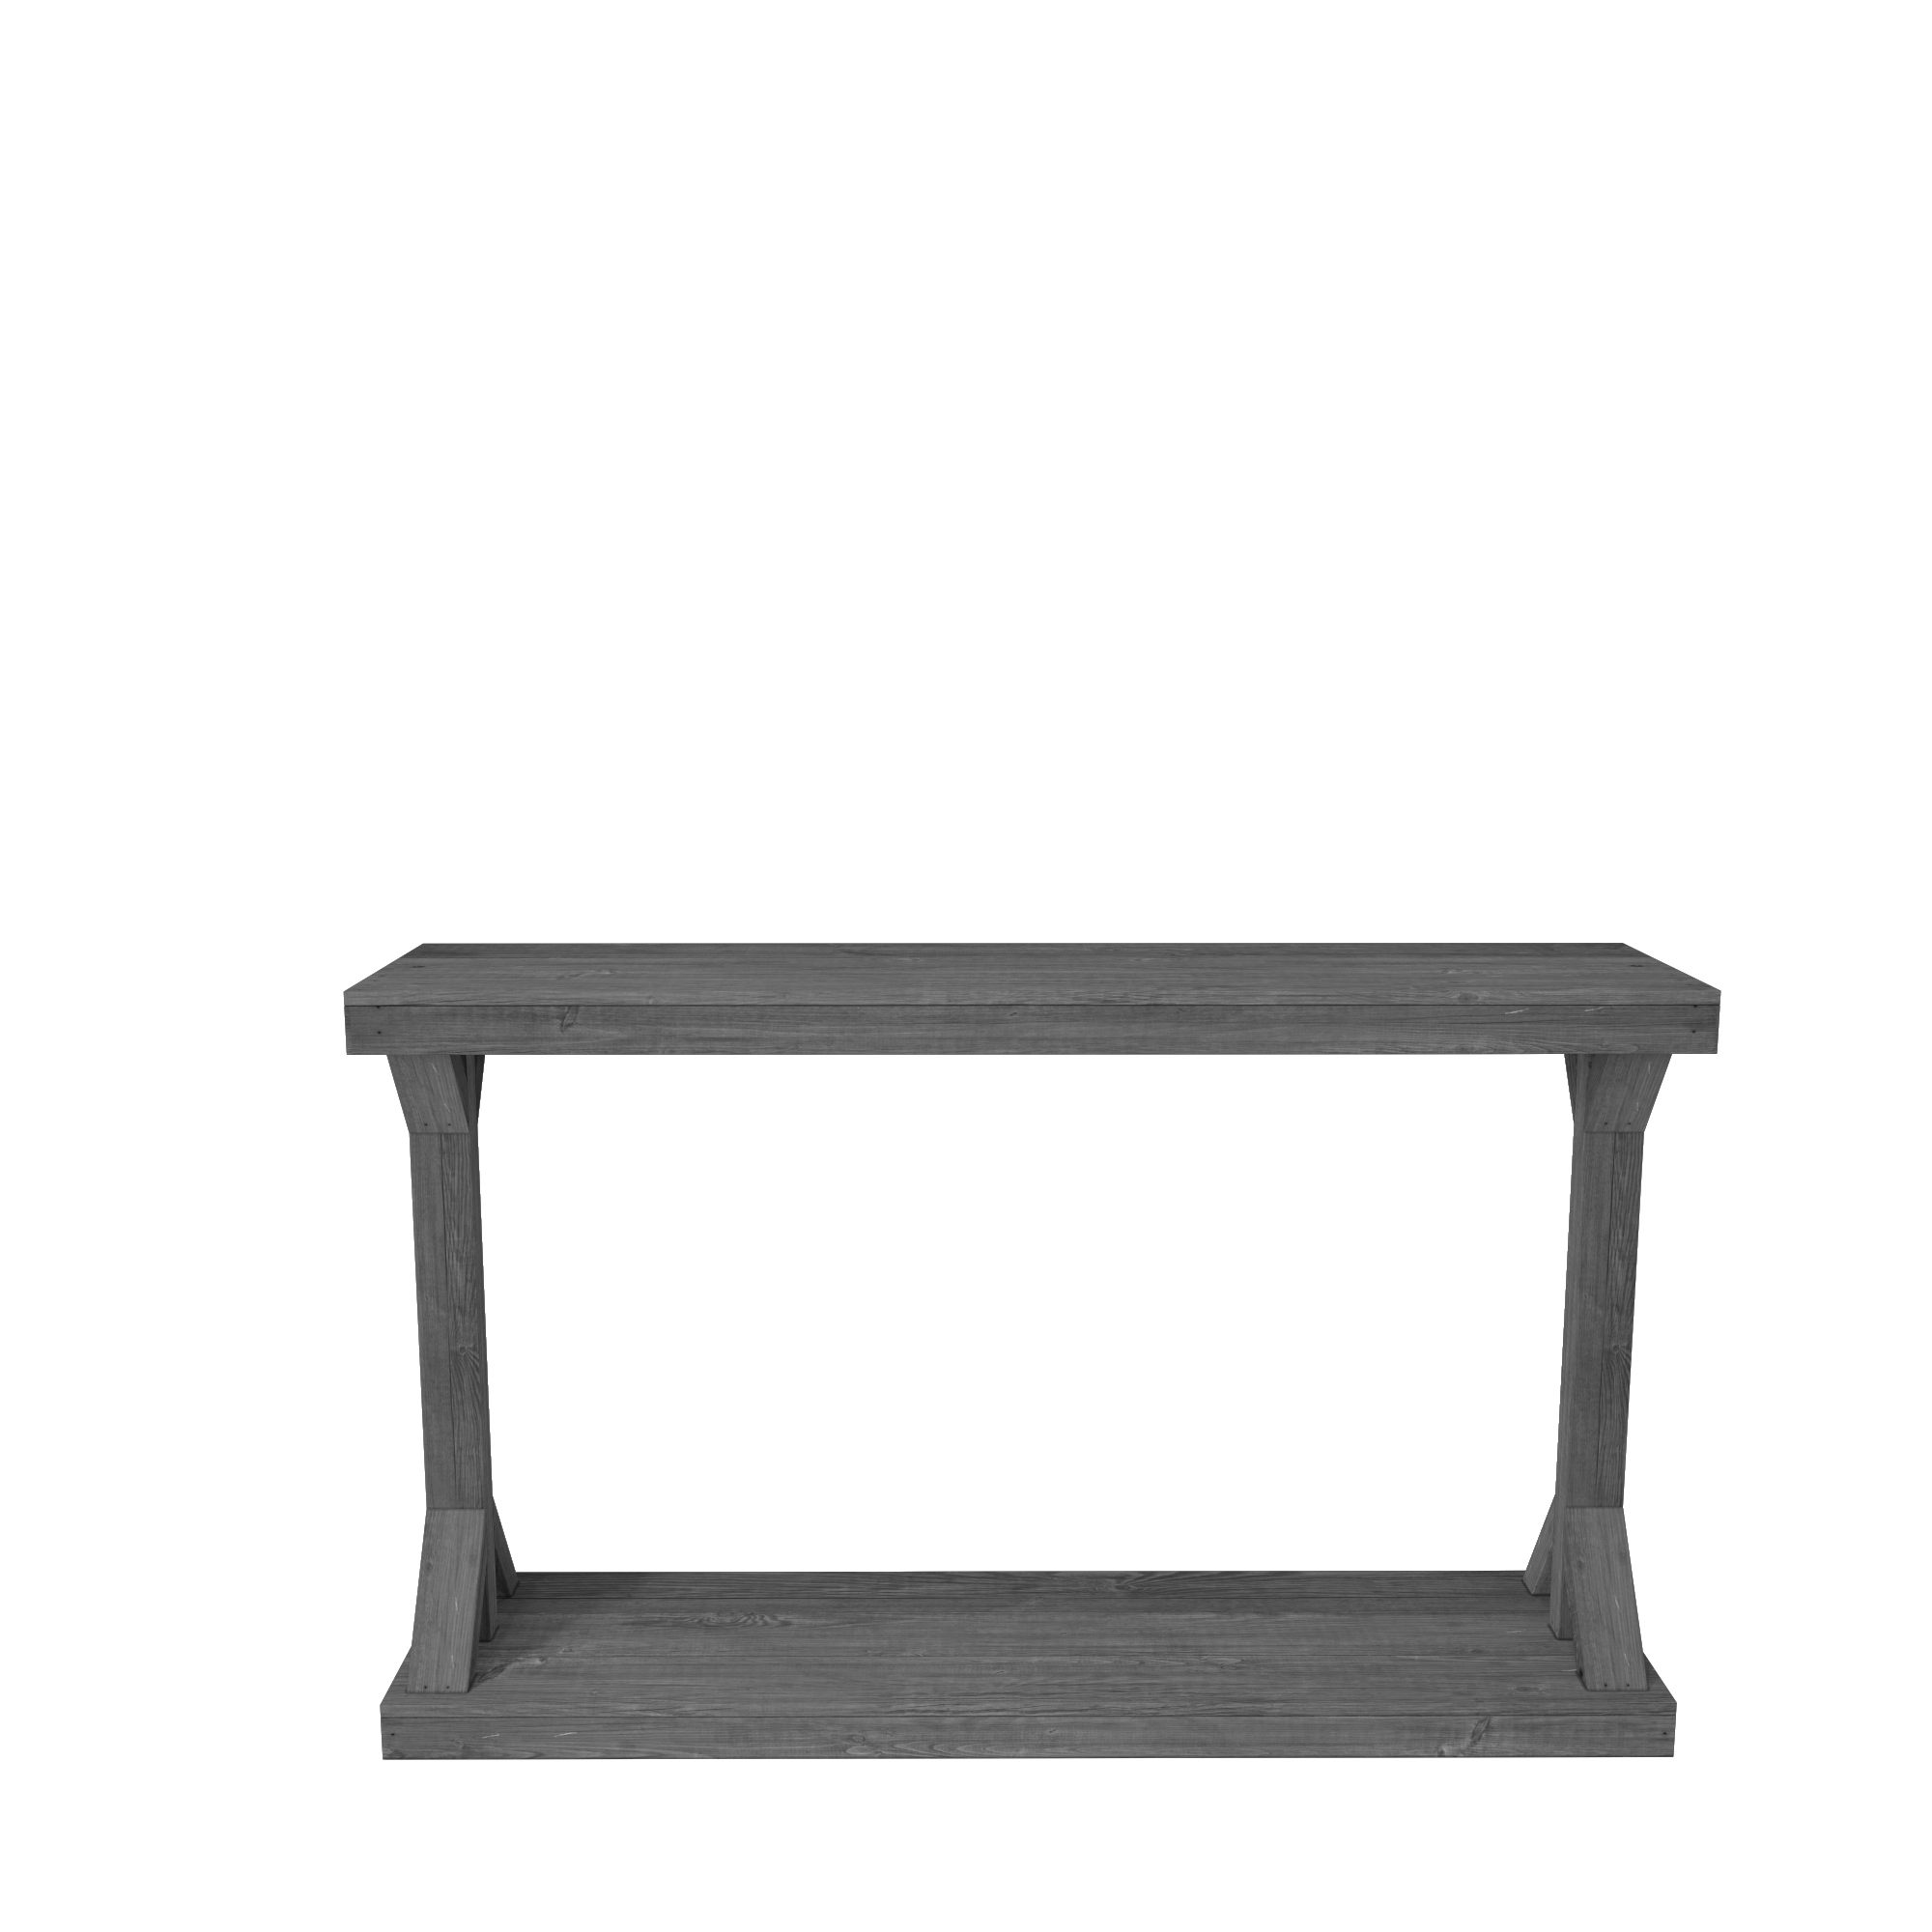 Woven Paths Large Rustic Barb Pedestal Entryway Console Table, Gray - image 1 of 4